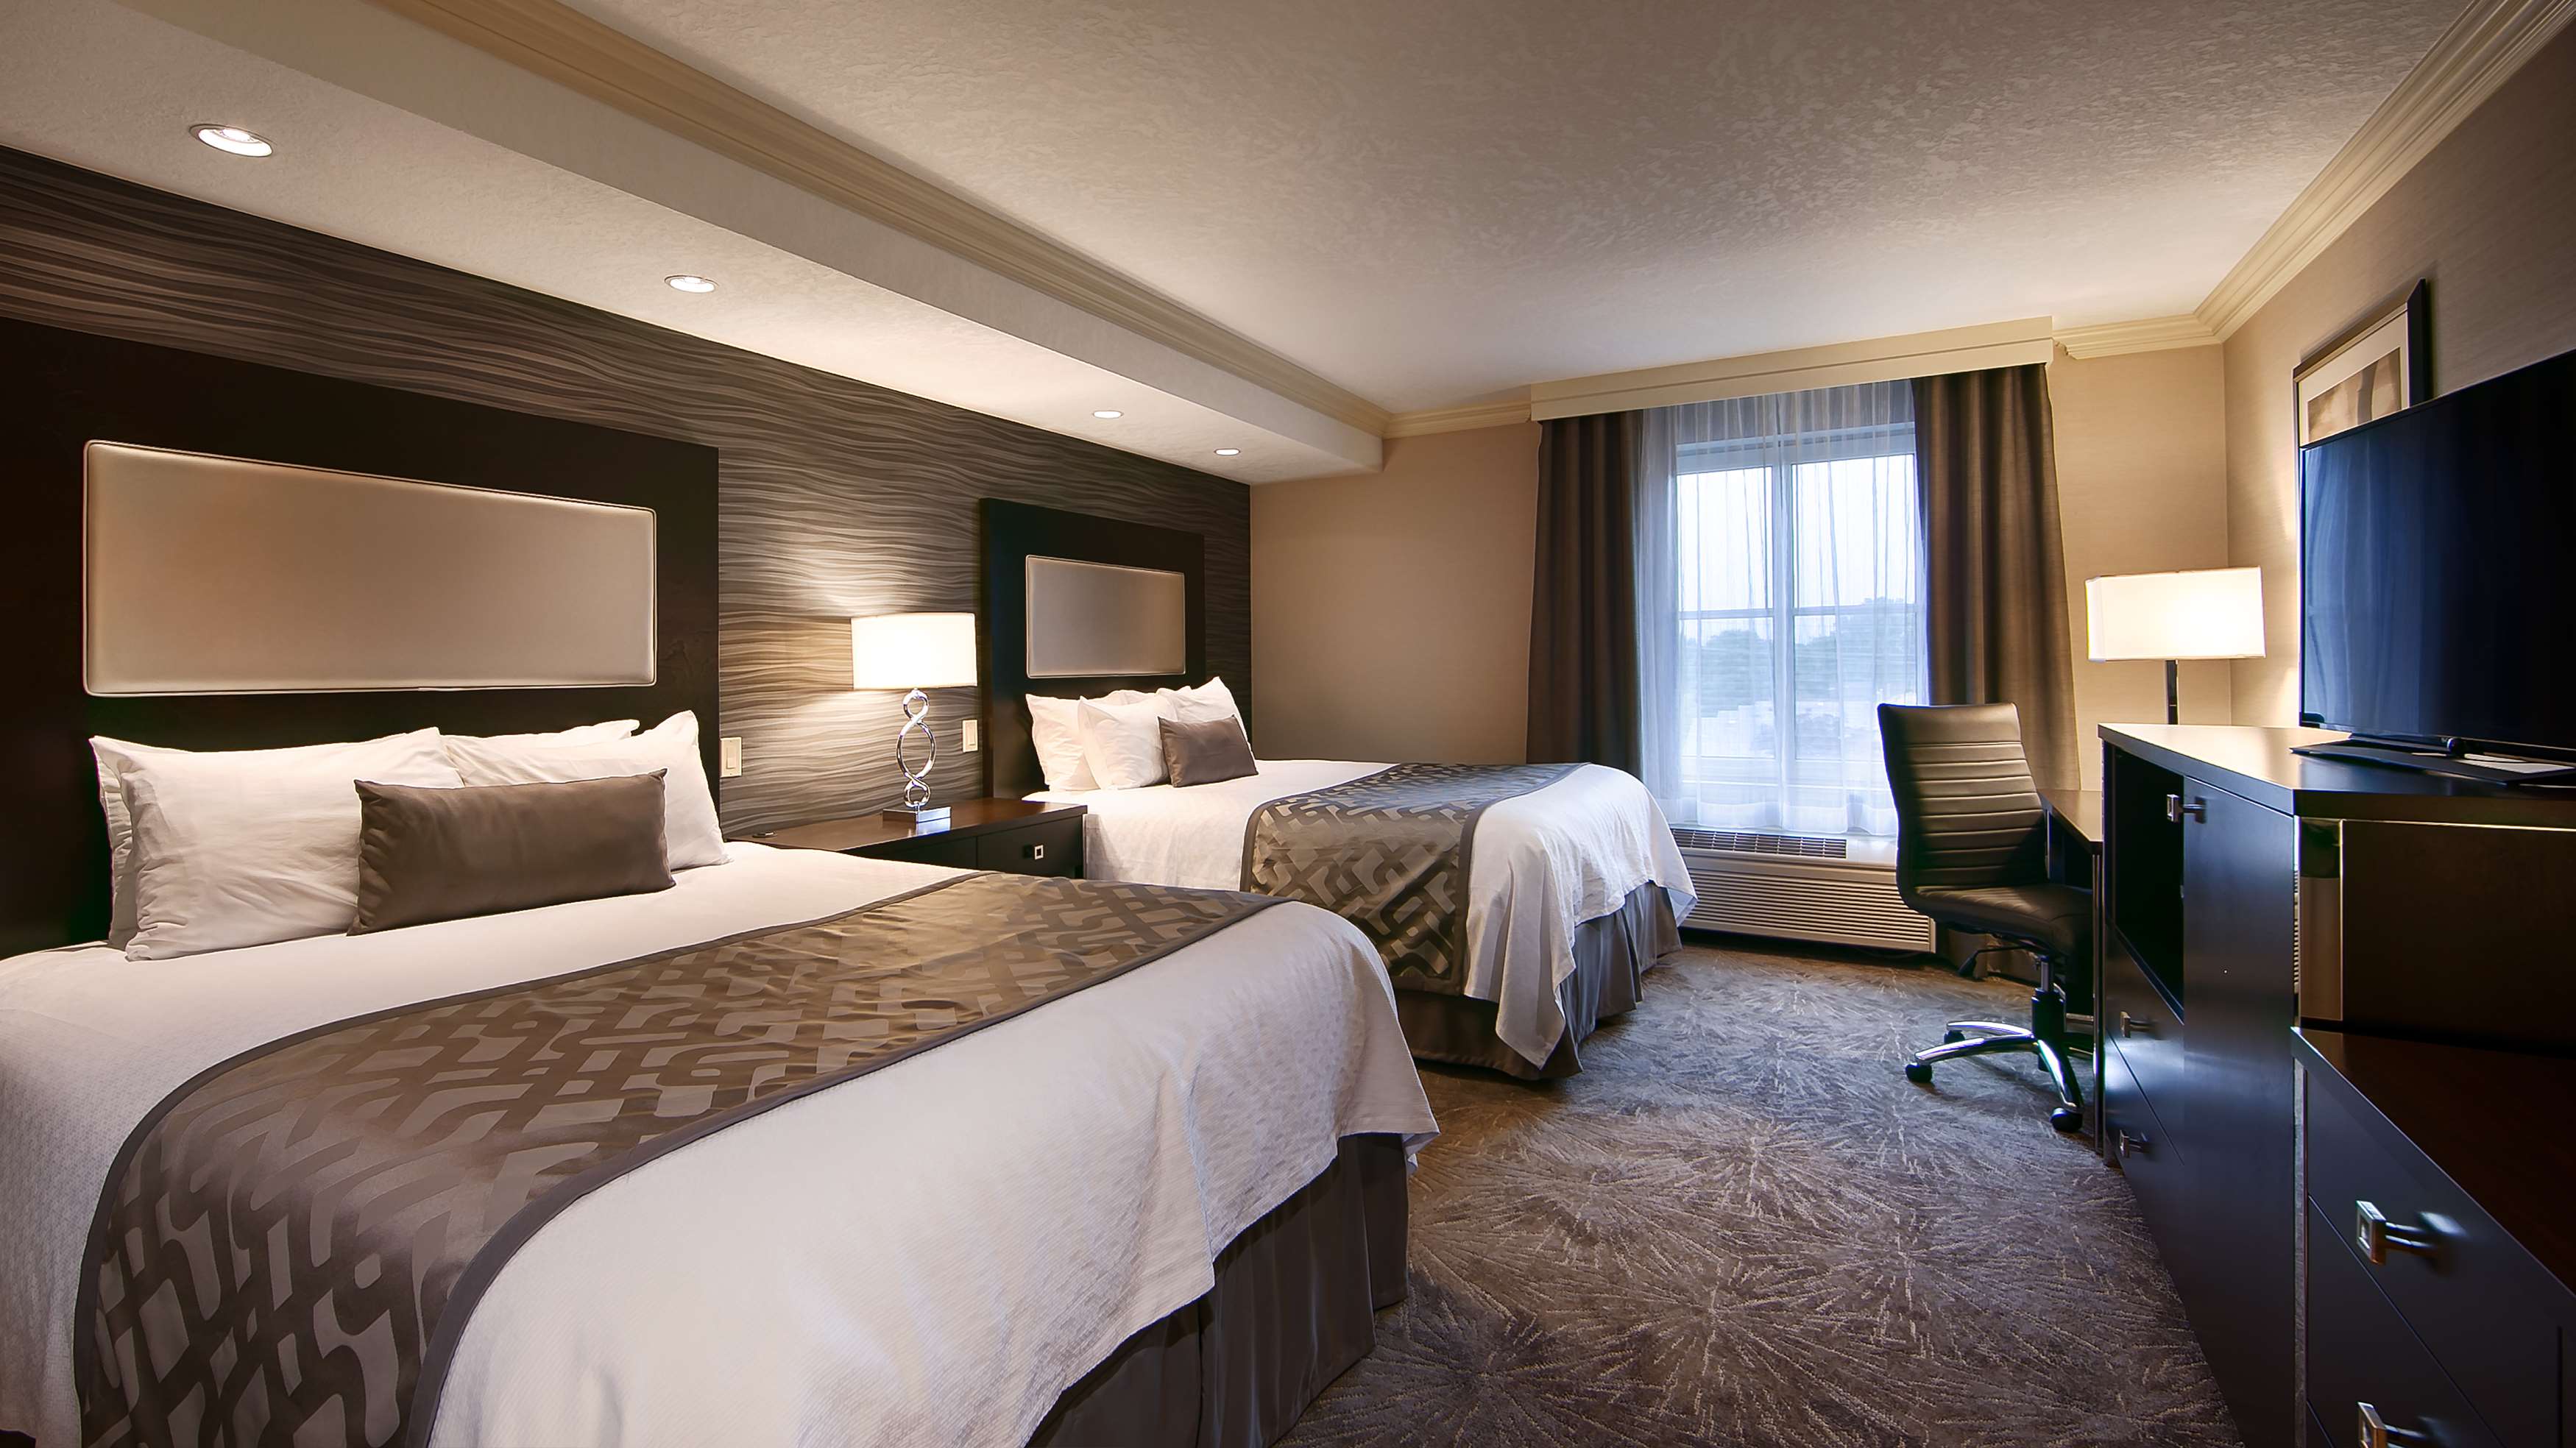 Deluxe Two Queen Bed Guest Room Best Western Plus The Arden Park Hotel Stratford (519)275-2936